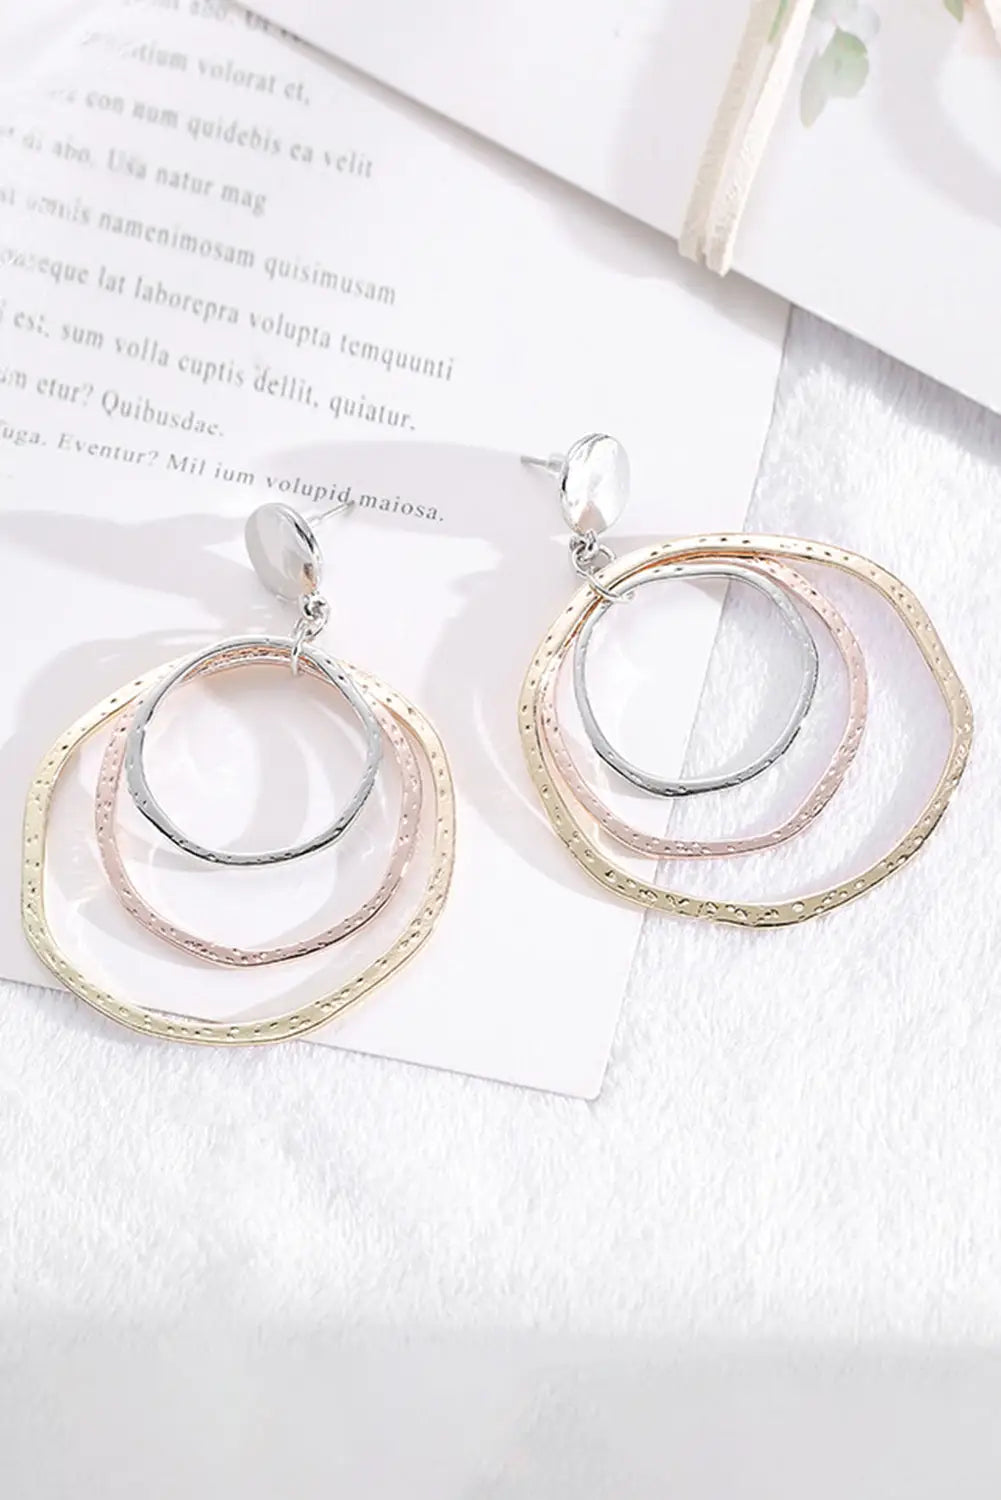 Silver 3-color concentric rings dangle earrings - one size / alloy